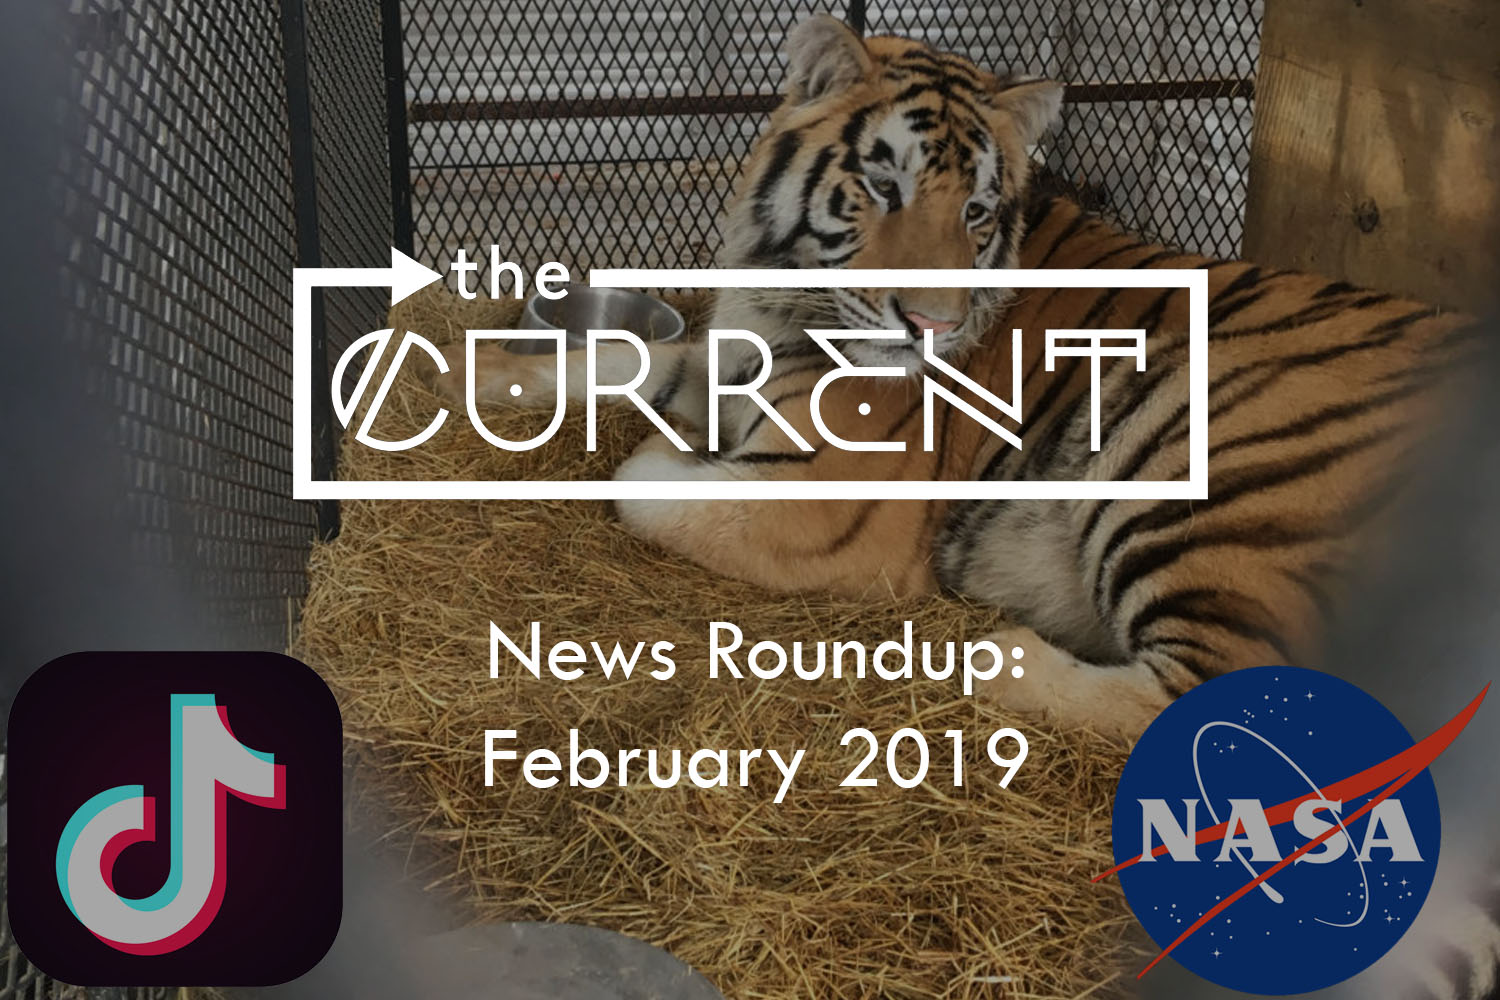 GRAPHIC: Image features the tiger found in a southeast Houston home in transport to an animal sanctuary and the logos of TikTok and NASA. Text reads "The Current - News Round up: Febrary 2019. Graphic created by Trey Blakely and The Signal Online Editor Alyssa Shotwell.